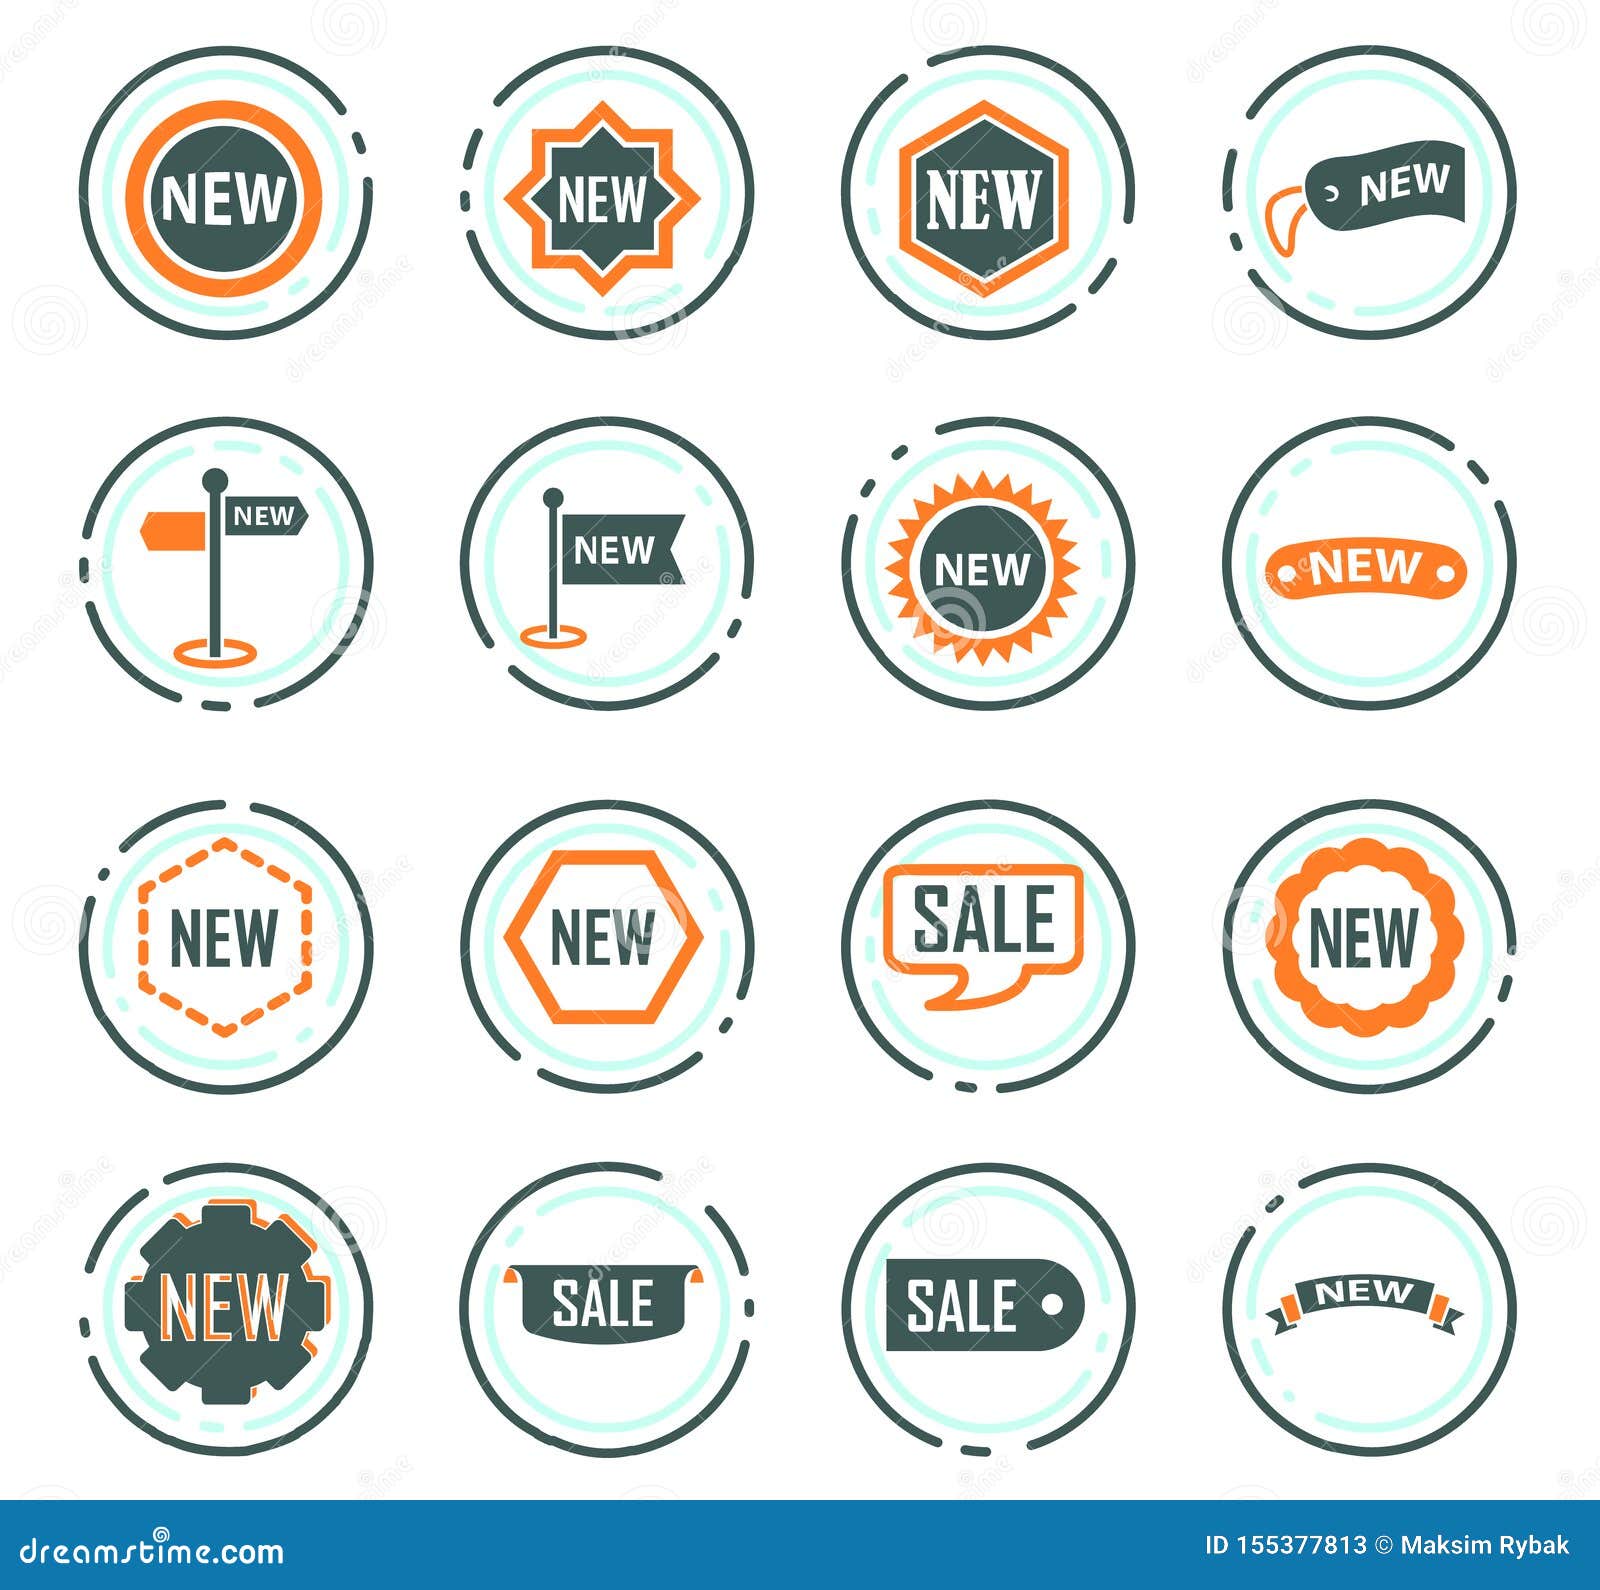 New Stiker  And Label Set Icons  Stock Vector Illustration 